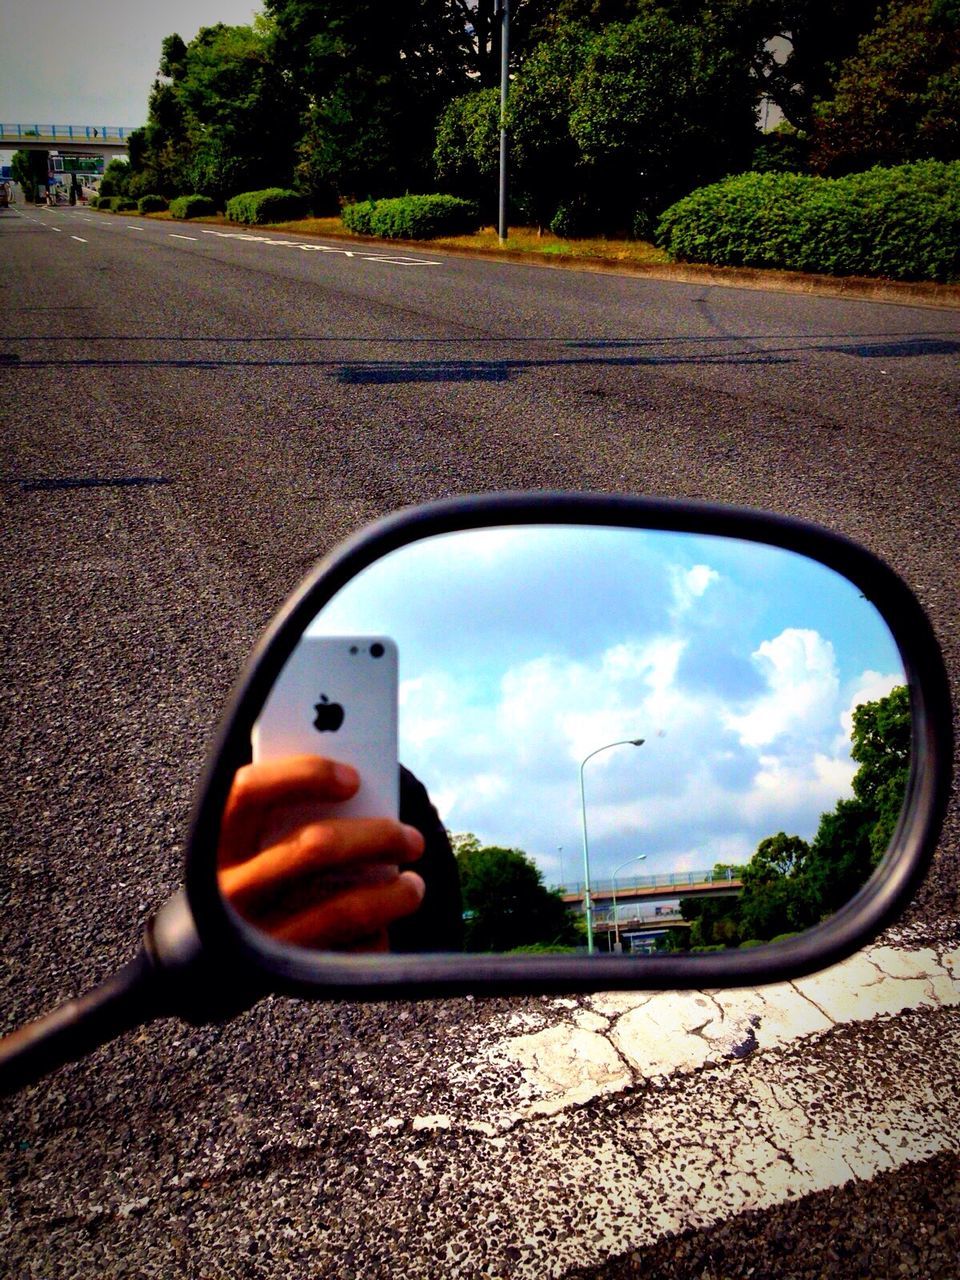 transportation, car, street, road, land vehicle, mode of transport, sky, tree, cloud - sky, side-view mirror, reflection, cloud, day, road marking, outdoors, asphalt, circle, no people, the way forward, sunlight